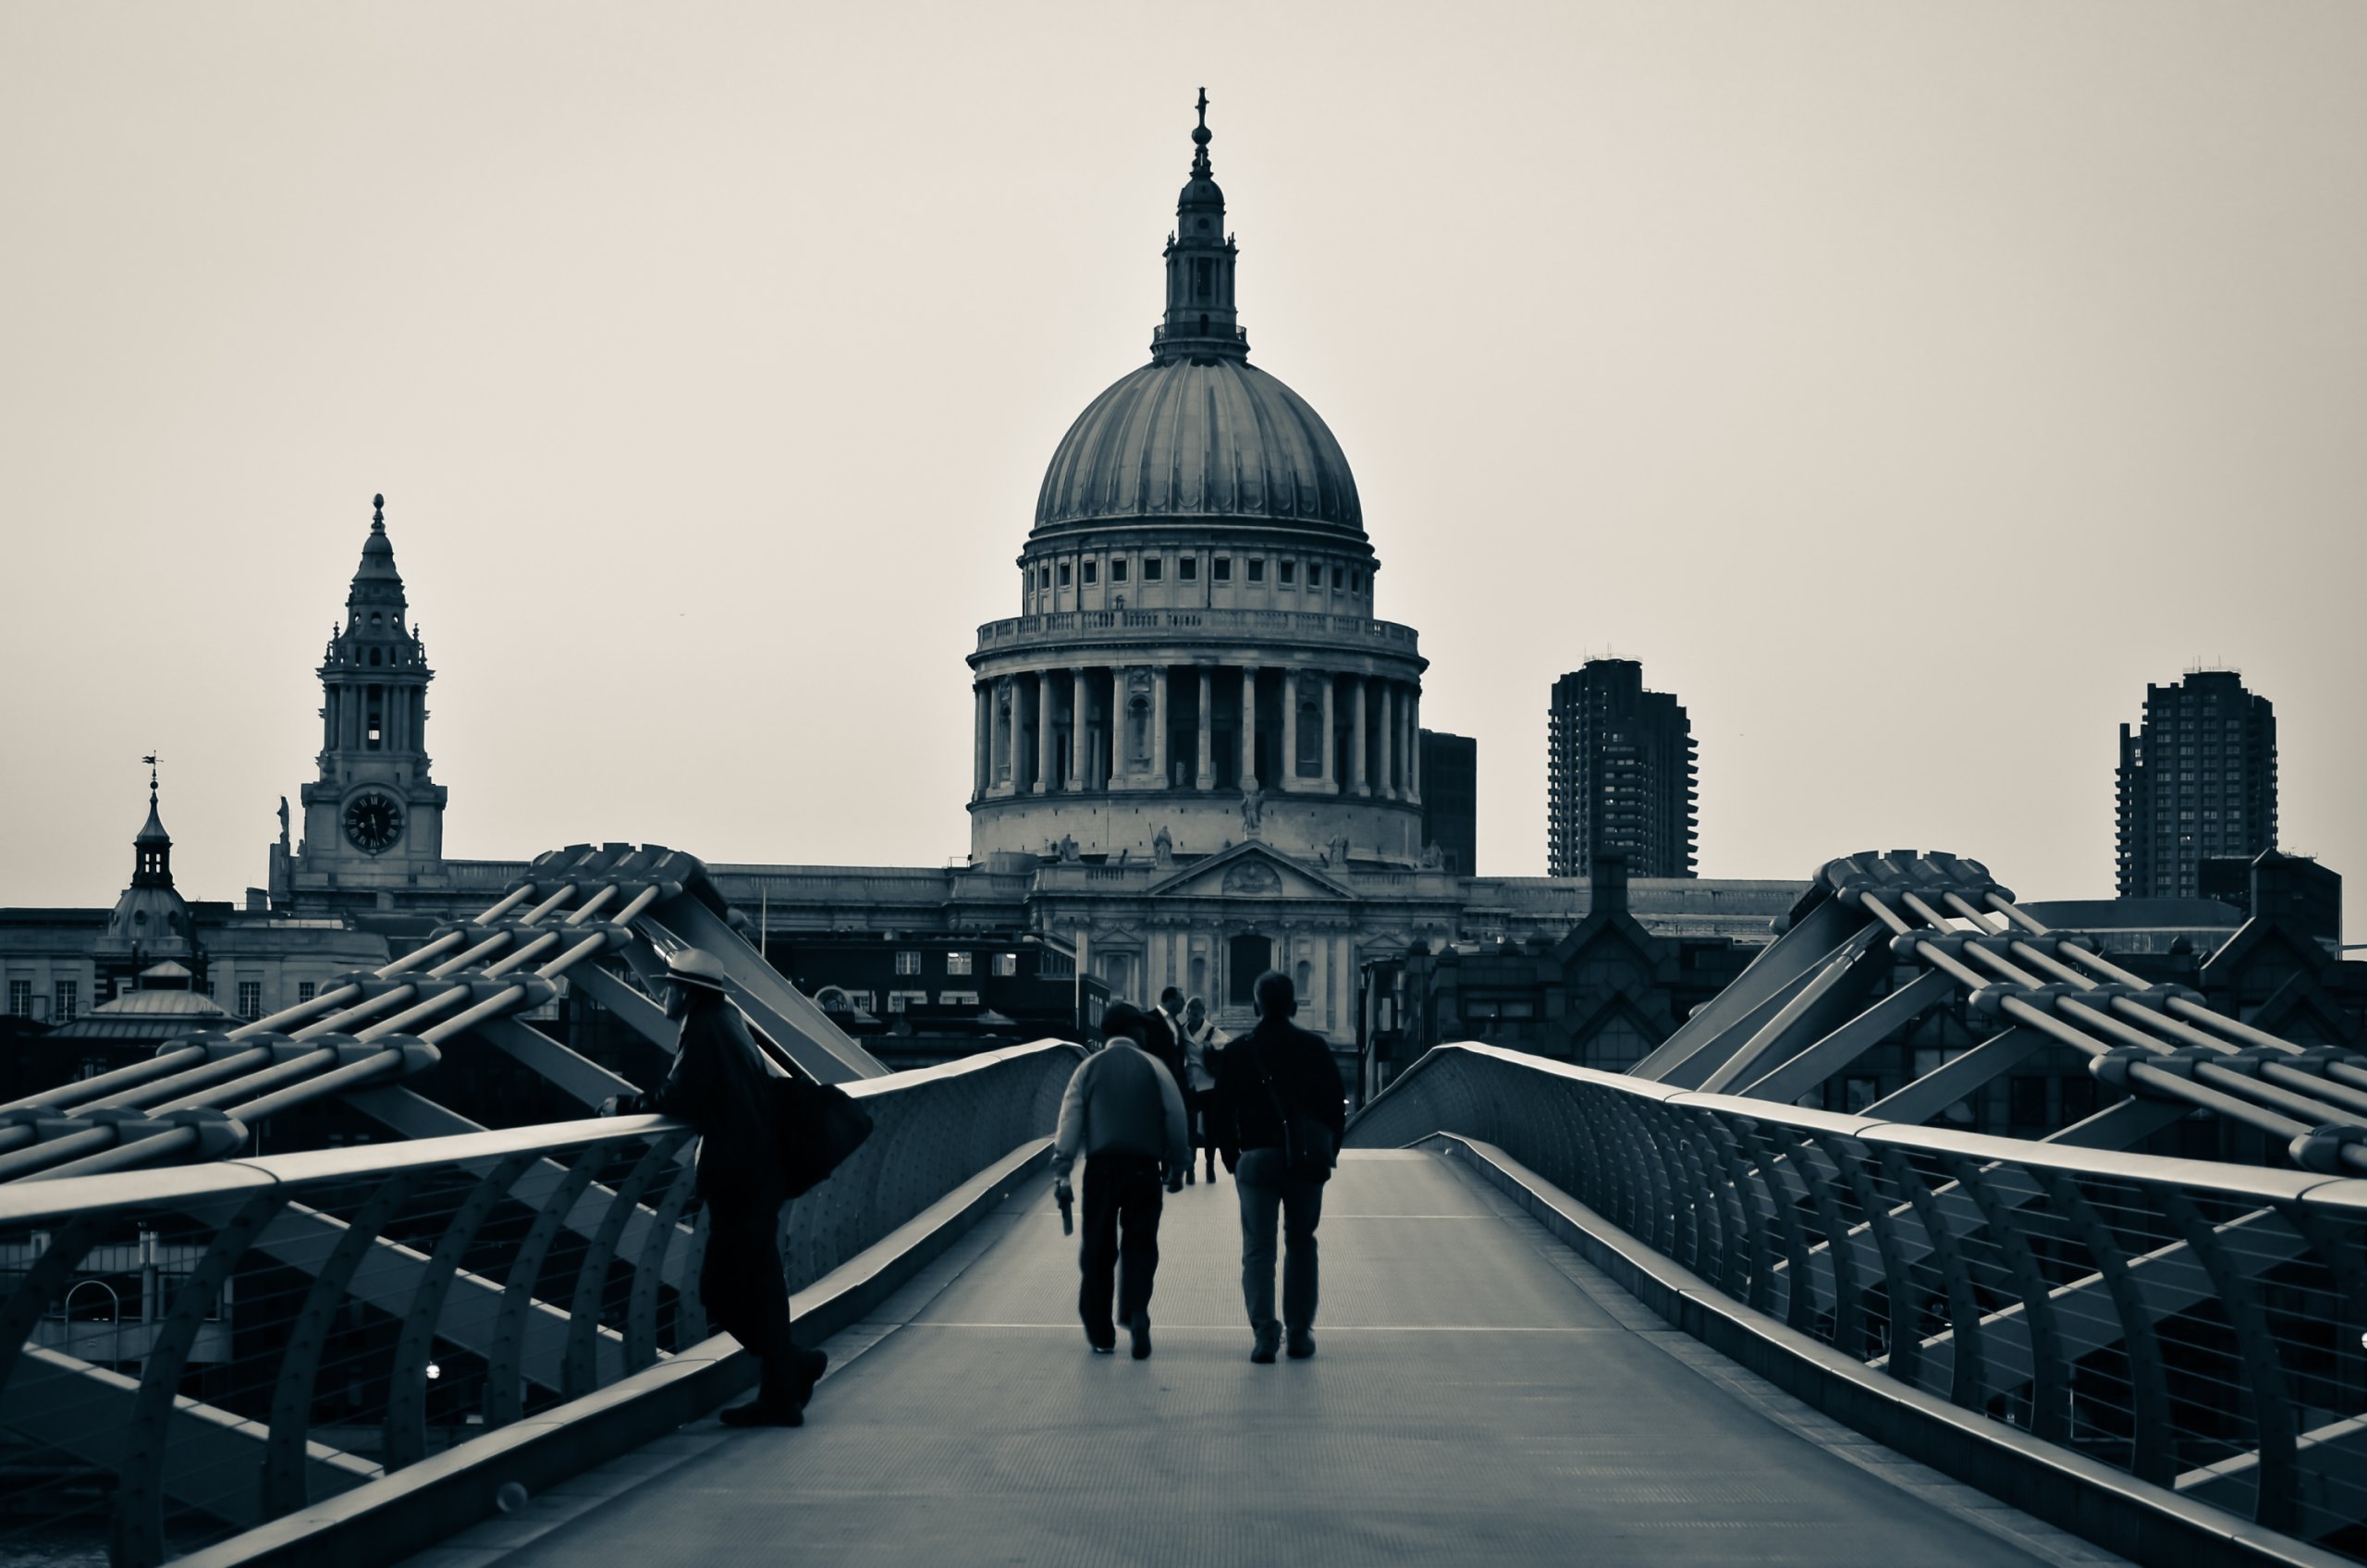 The Millennium Bridge, officially known as the London